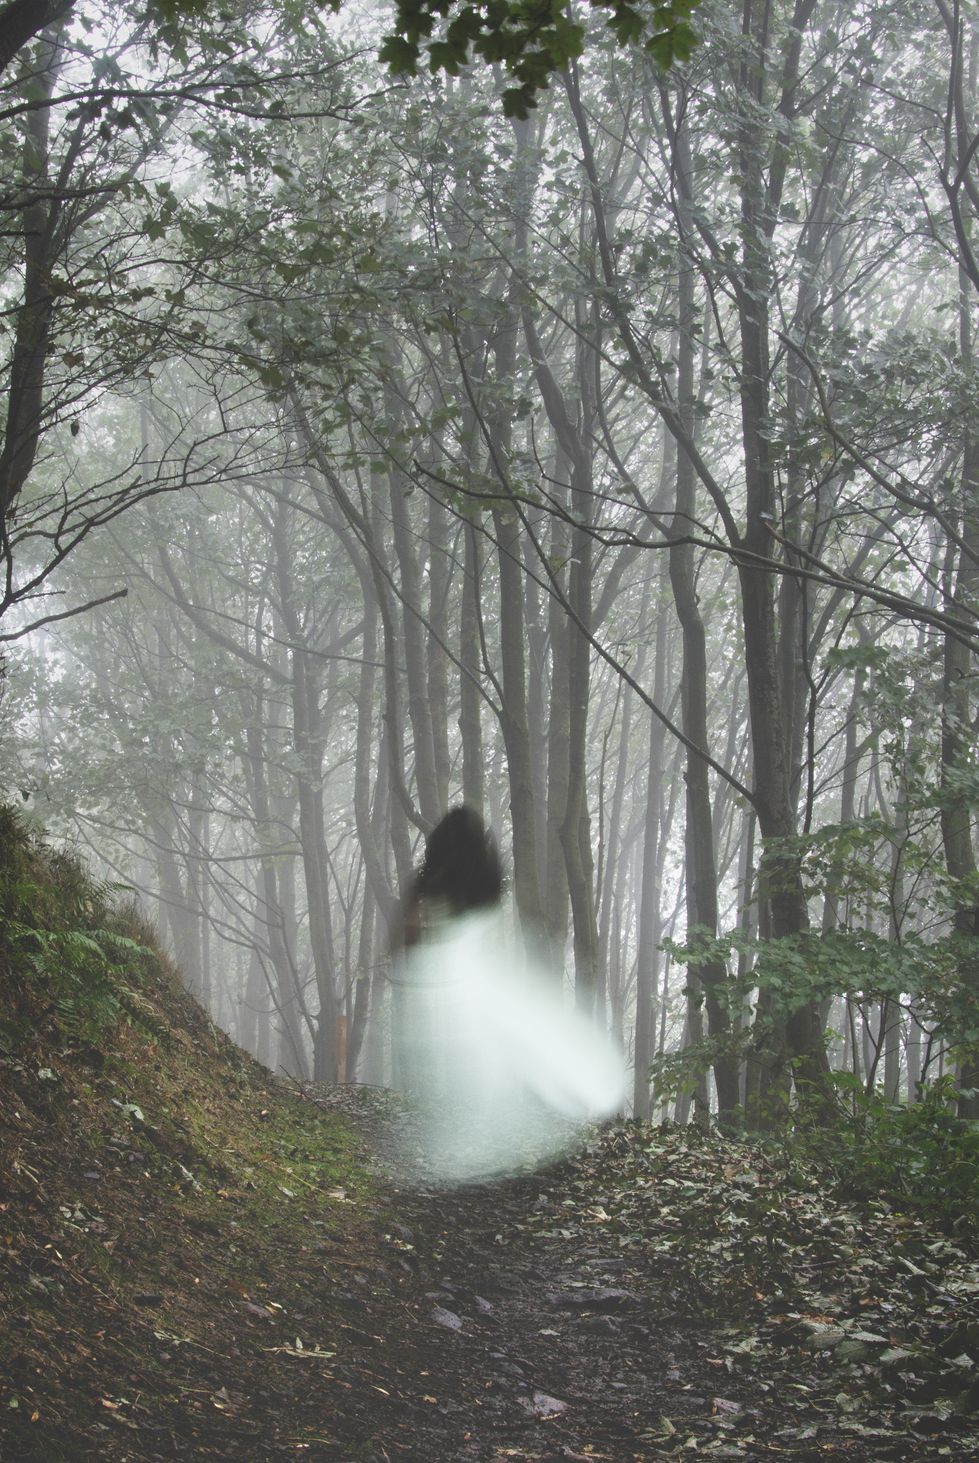 an out of focus, blurred ghostly woman wearing a white dress, running away from the camera on a misty autumn day in a forest